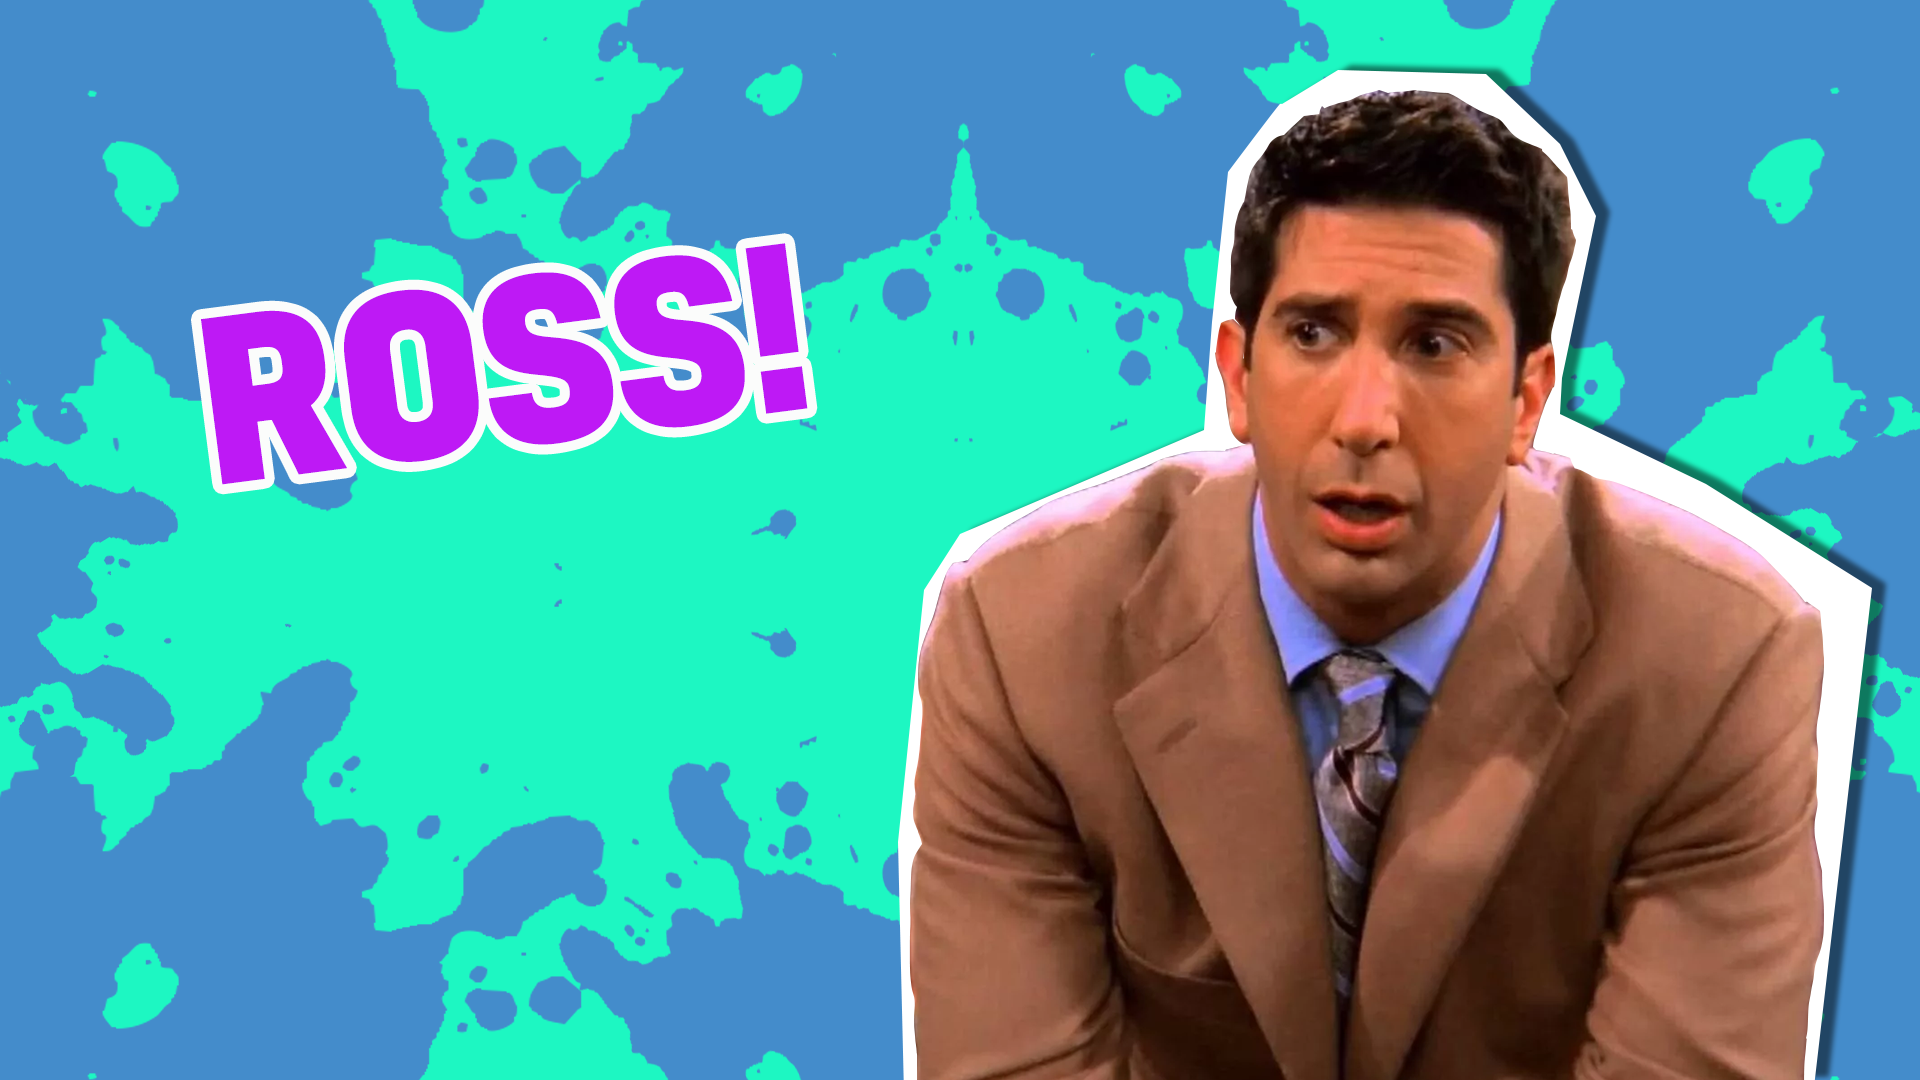 You're like Ross! You're clever, a natural leader and you probably love monkeys! You can be a BIT uptight sometimes, but you're just trying to follow the rules!